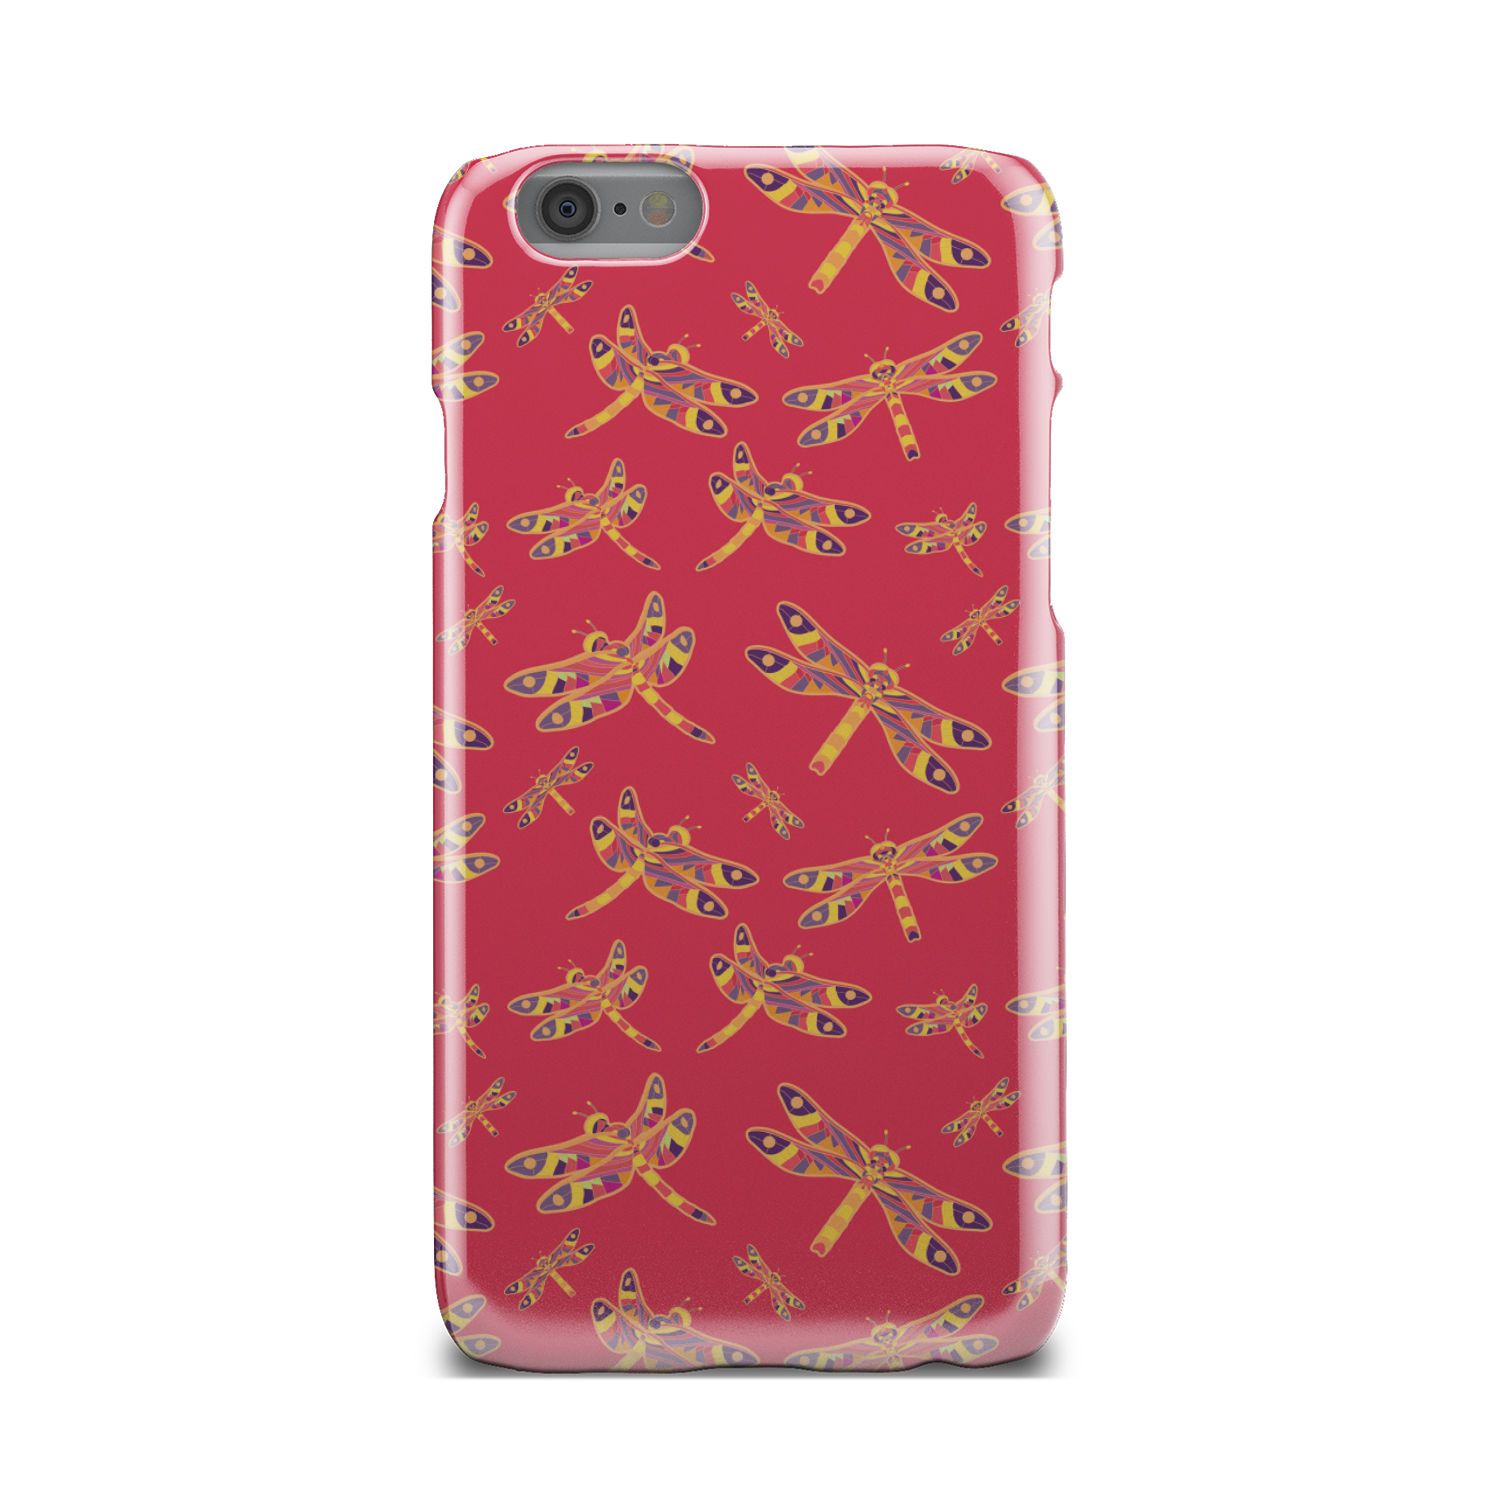 Gathering Rouge Phone Case Phone Case wc-fulfillment iPhone 6s 